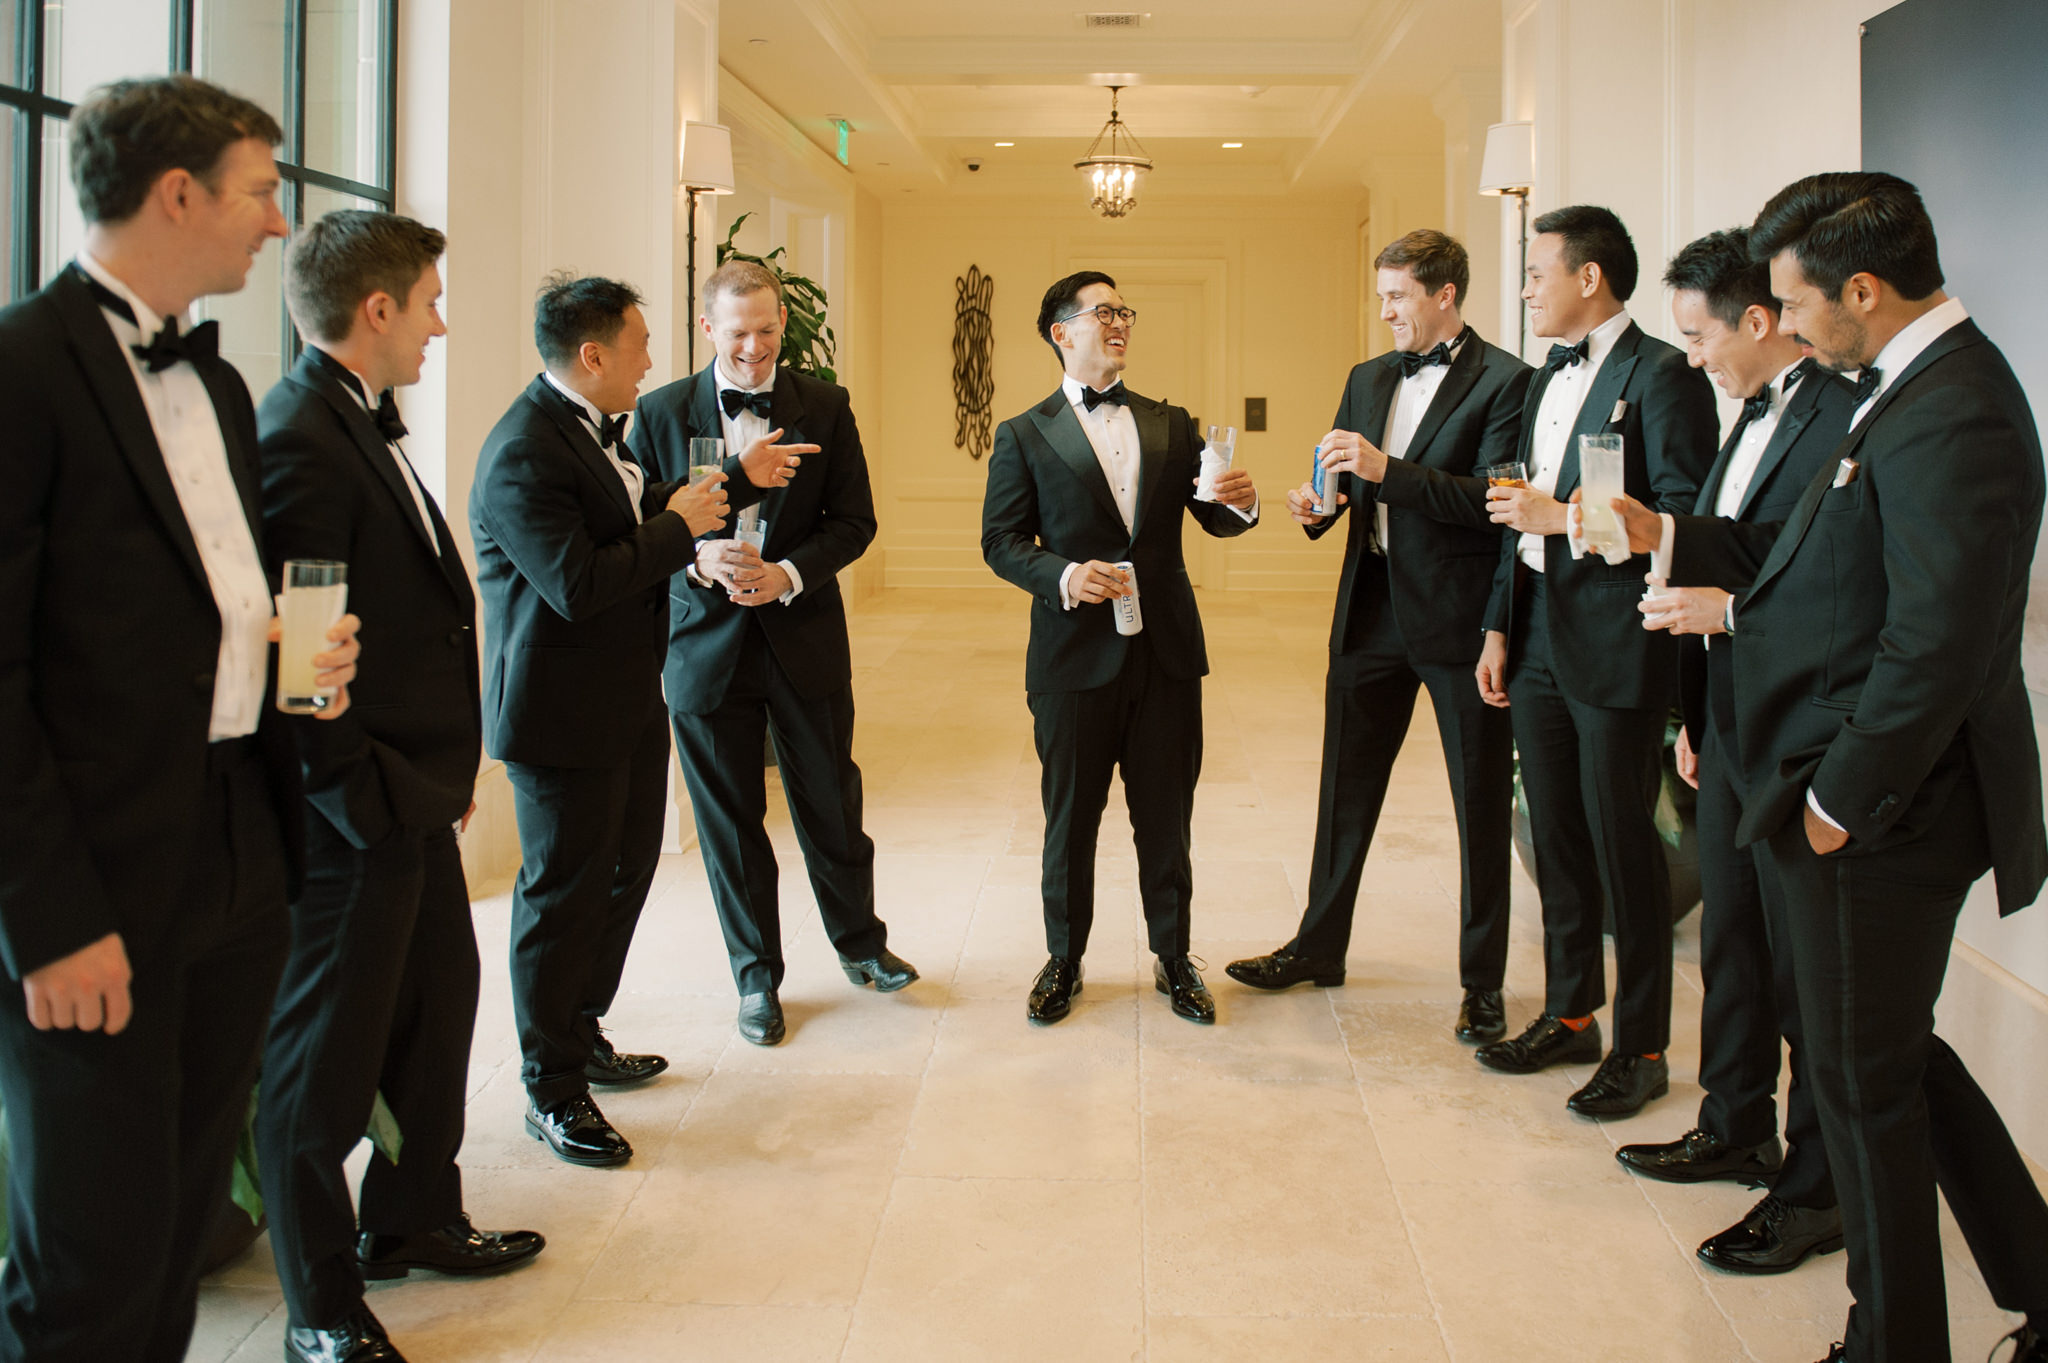 The groomsmen are laughing, chatting and drinking while waiting for the wedding ceremony. Image by Jenny Fu Studio